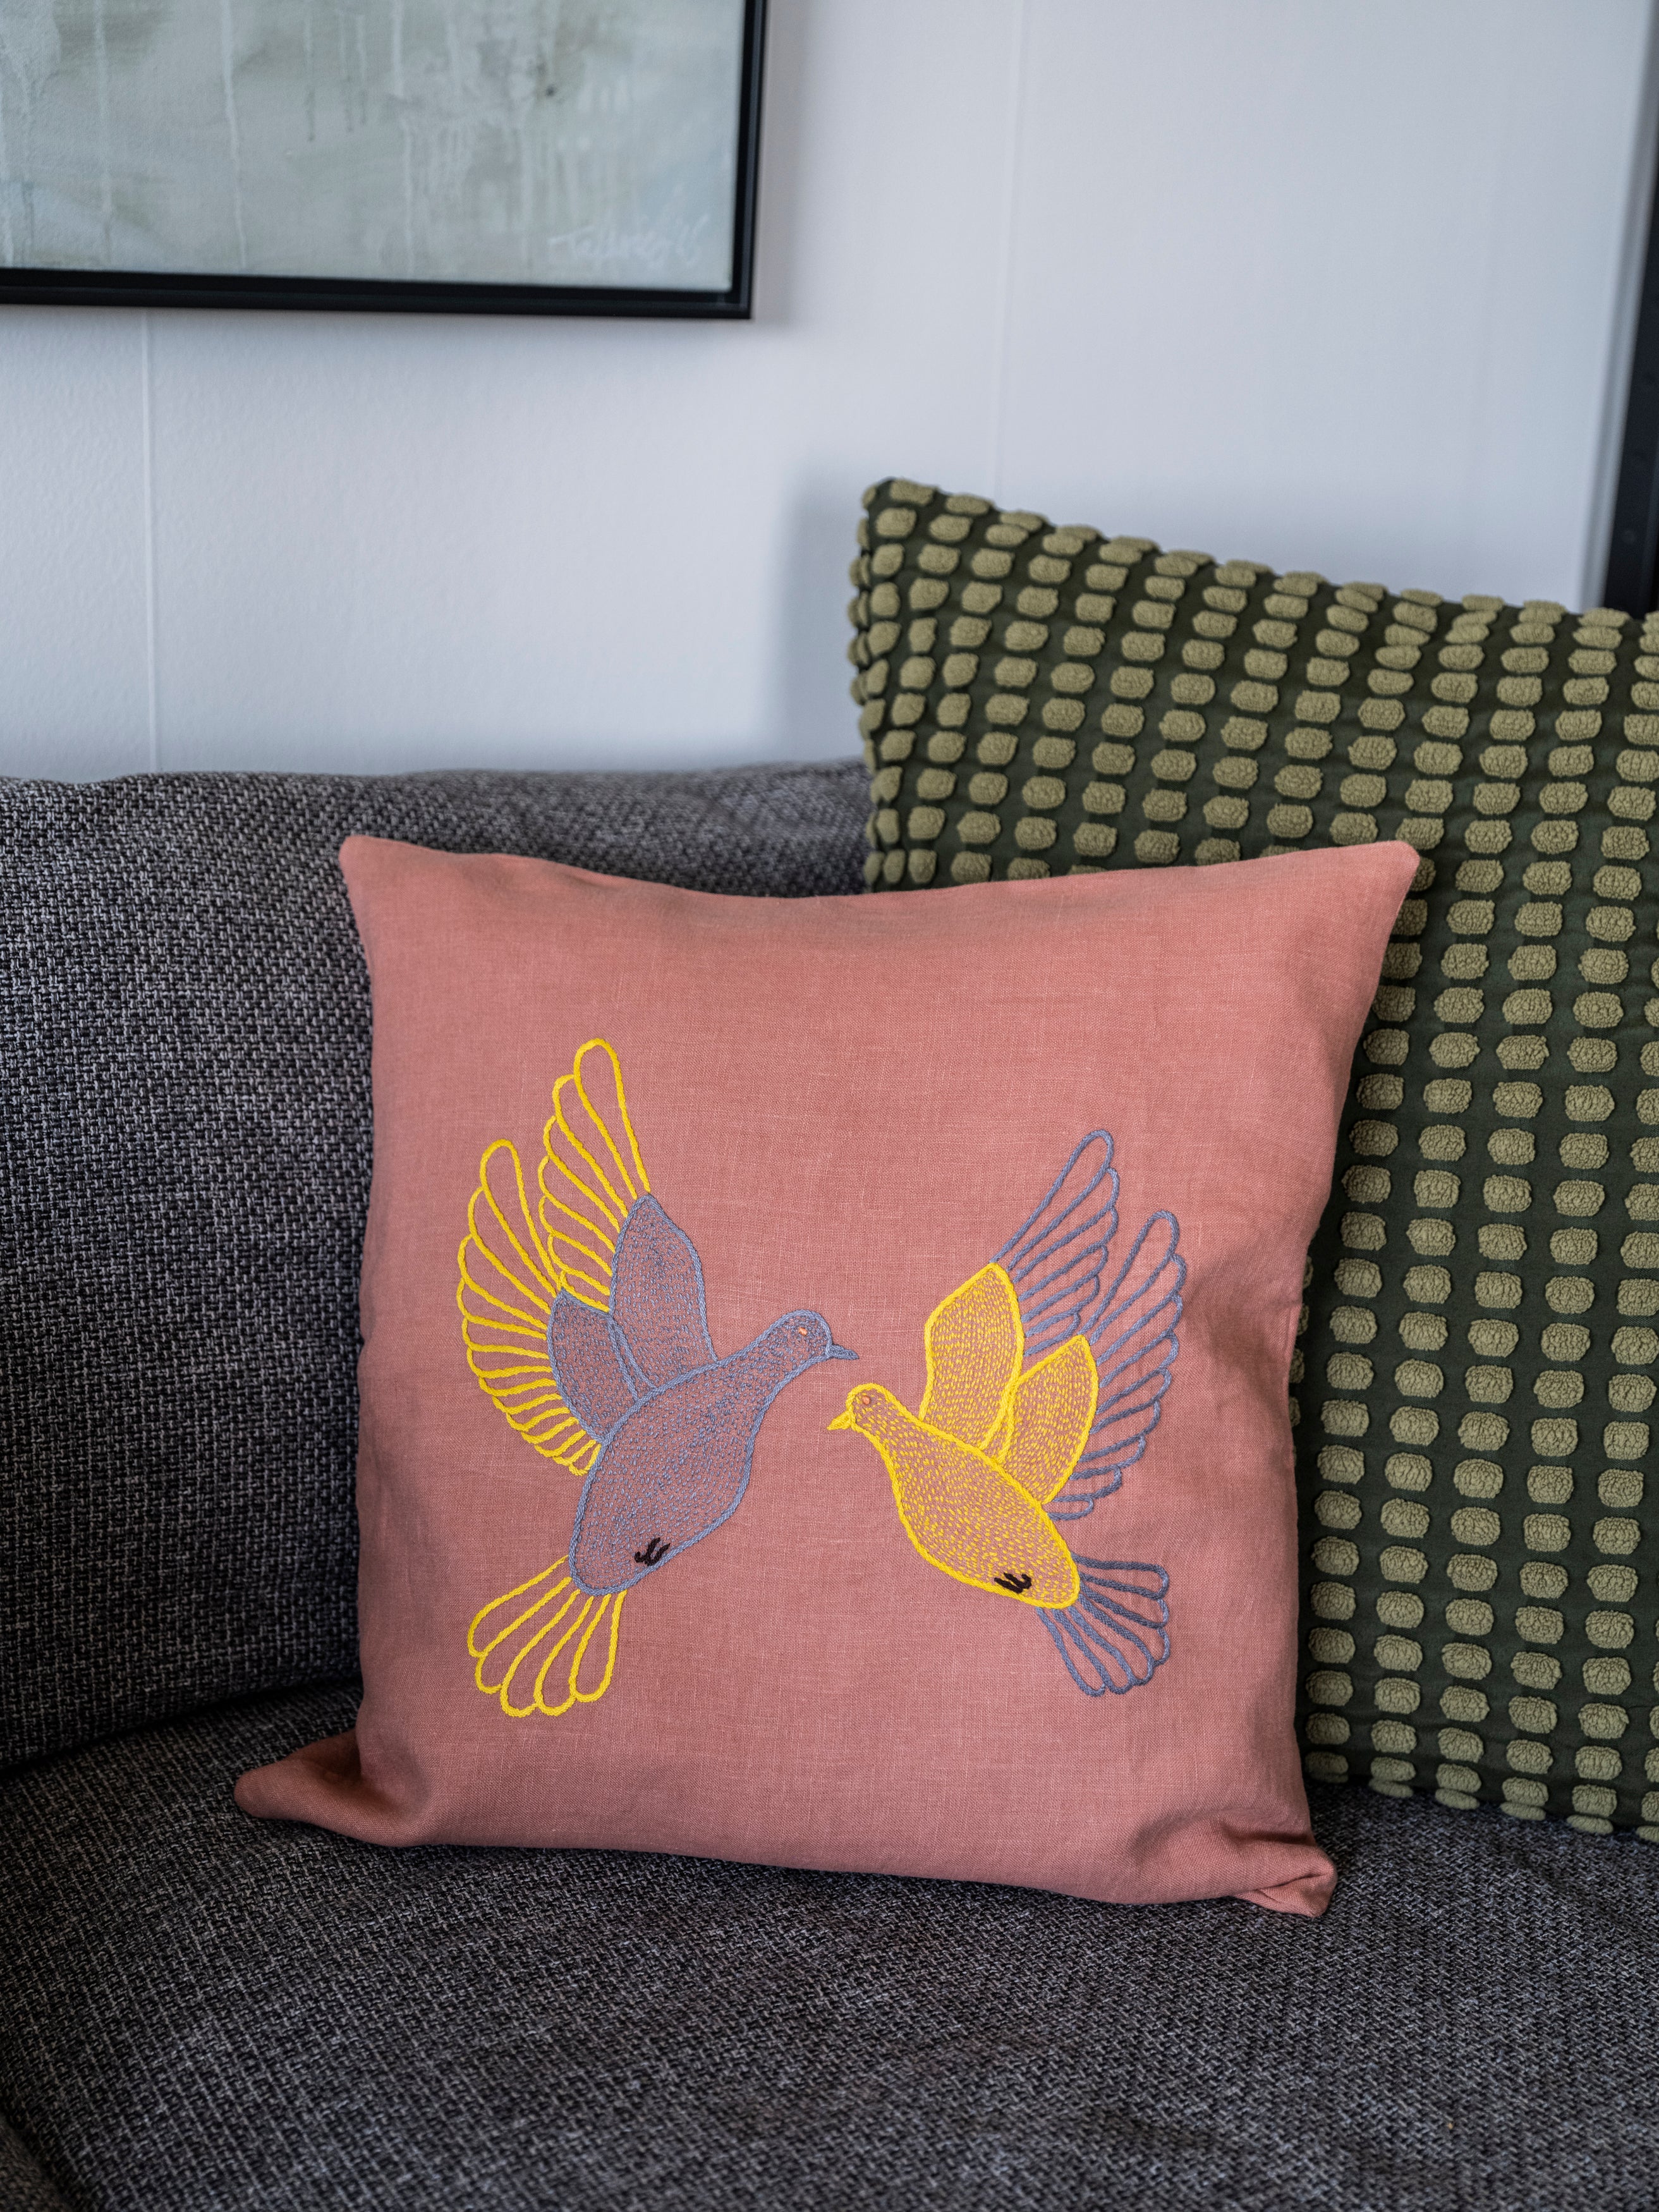 Flying dove pillow on pink linen